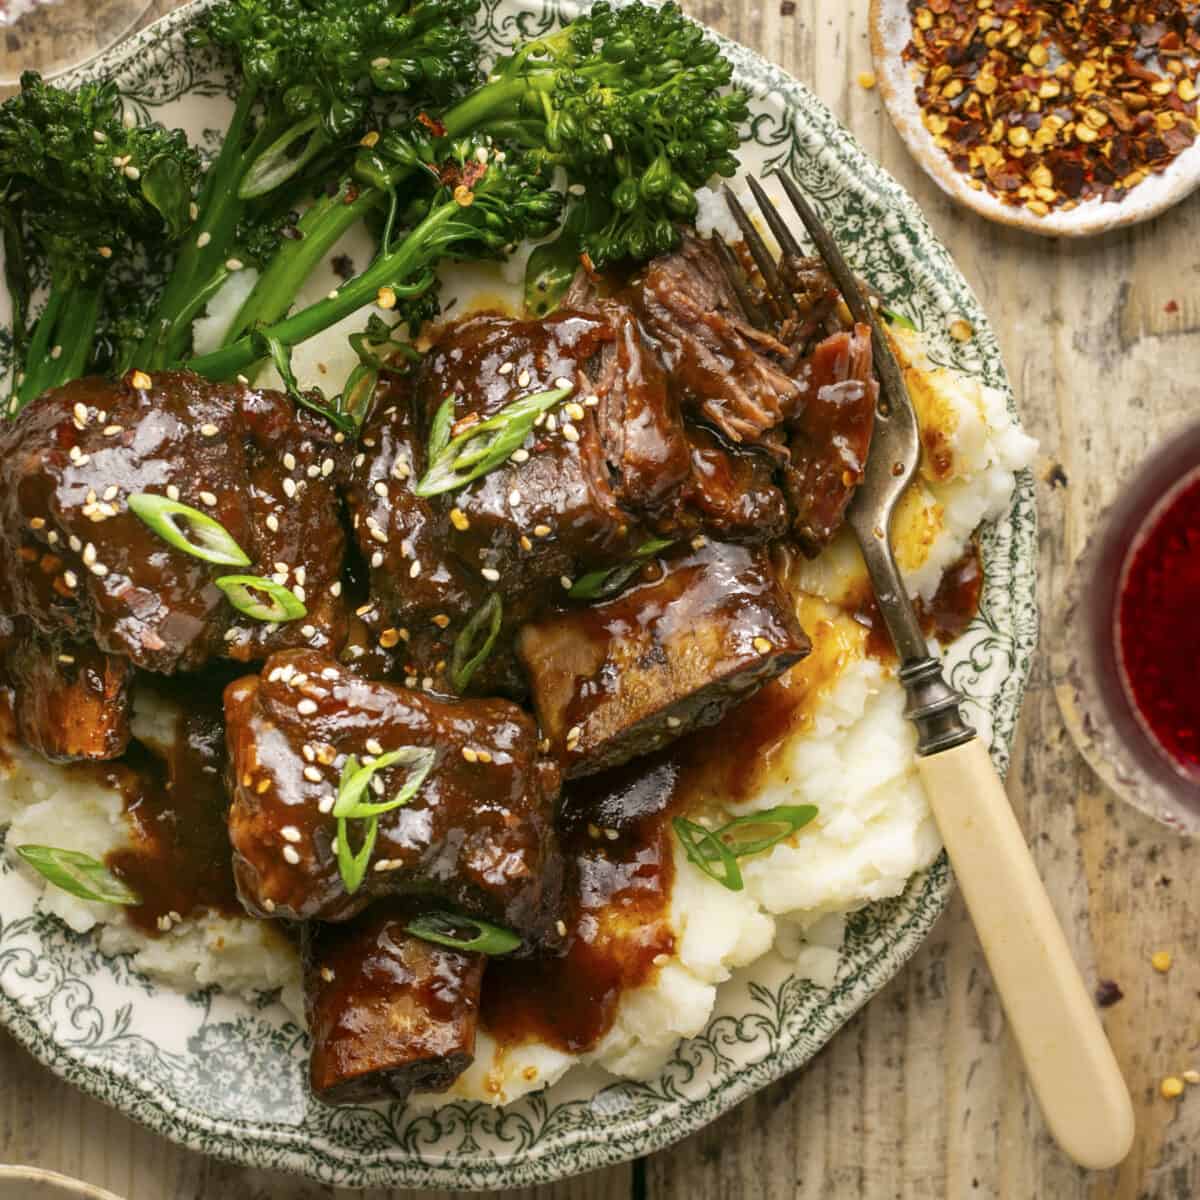 Sticky short ribs on a plate with mashed potatoes and broccoli.